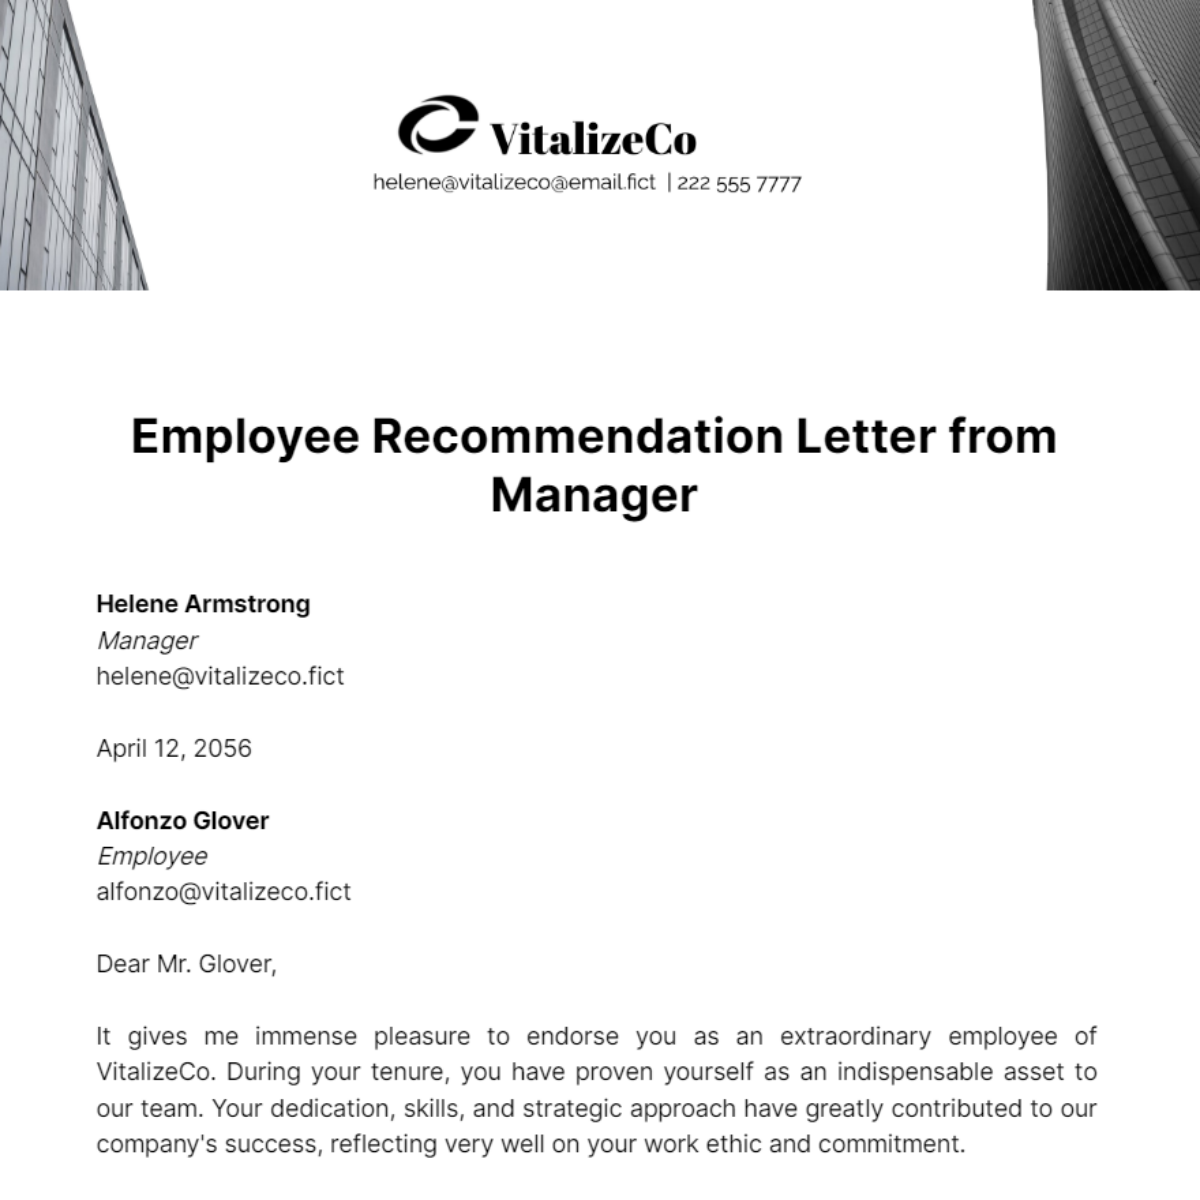 Employee Recommendation Letter from Manager Template